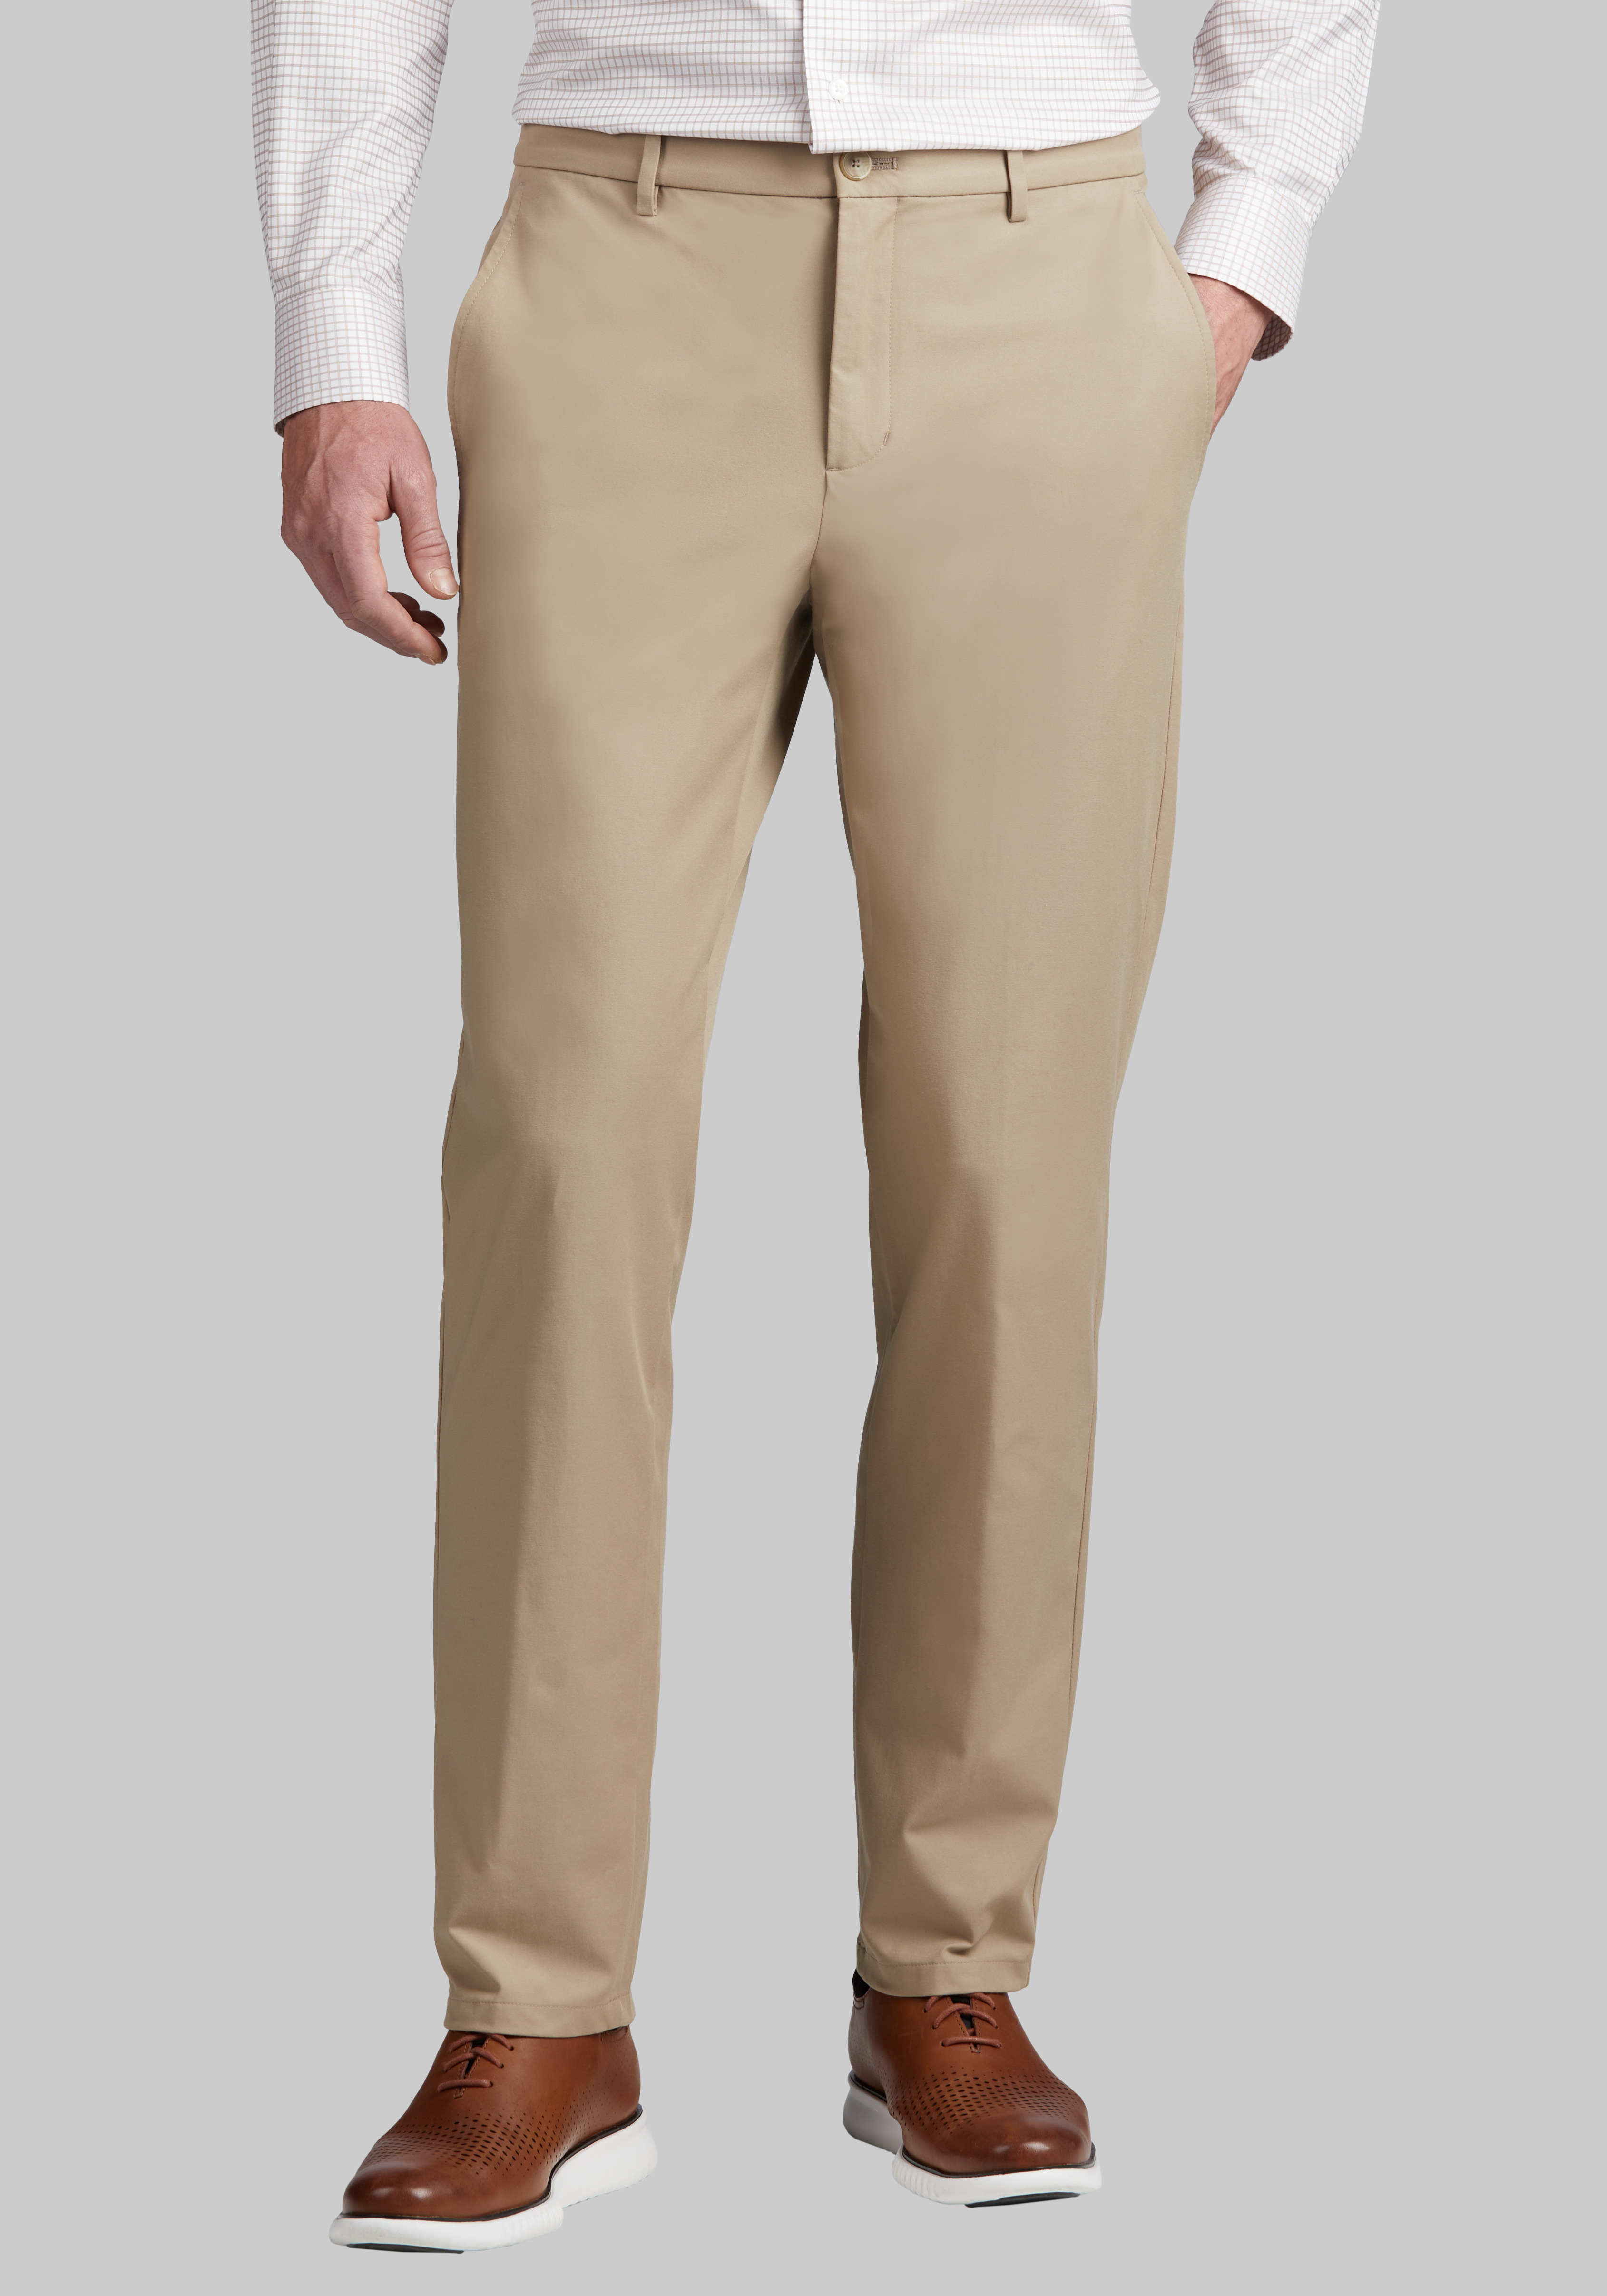 Reserve Collection Tailored Fit Flat Front Chino Pants CLEARANCE